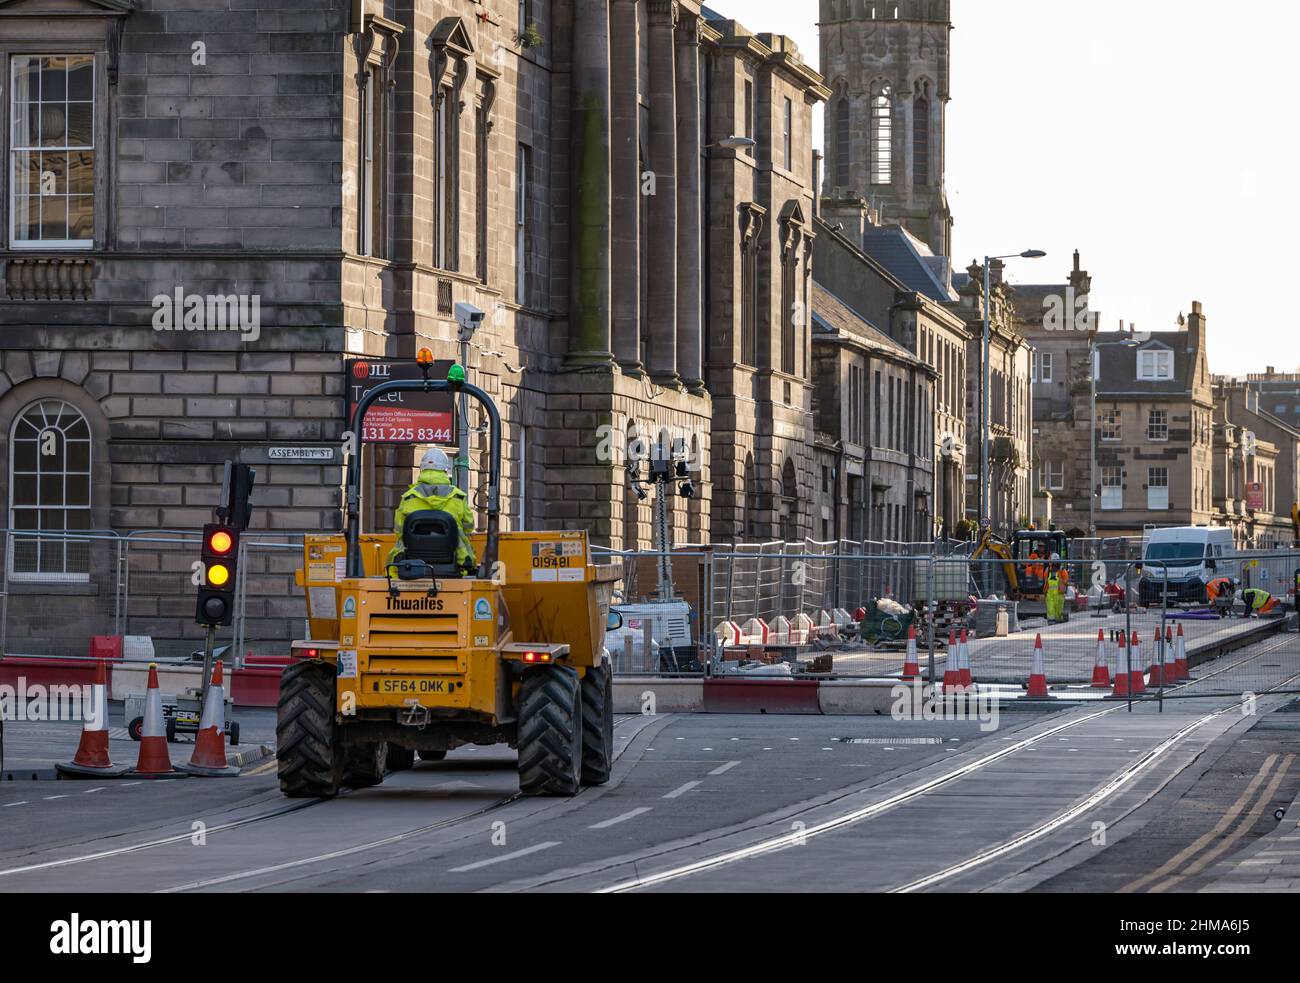 Leith, Edinburgh, Scotland, United Kingdom, 8th February 2022. Trams to Newhaven construction: As the major project approaches its final year, with work due on schedule and due to be completed in Spring 2023 within its £207.3m budget, numerous roads are closed to traffic in Leith. More than 60% of track has now been laid (2.8km) & 85% of the utility diversions have been carried out. Pictured: the tram tracks on Constitution Street with the road closed Stock Photo